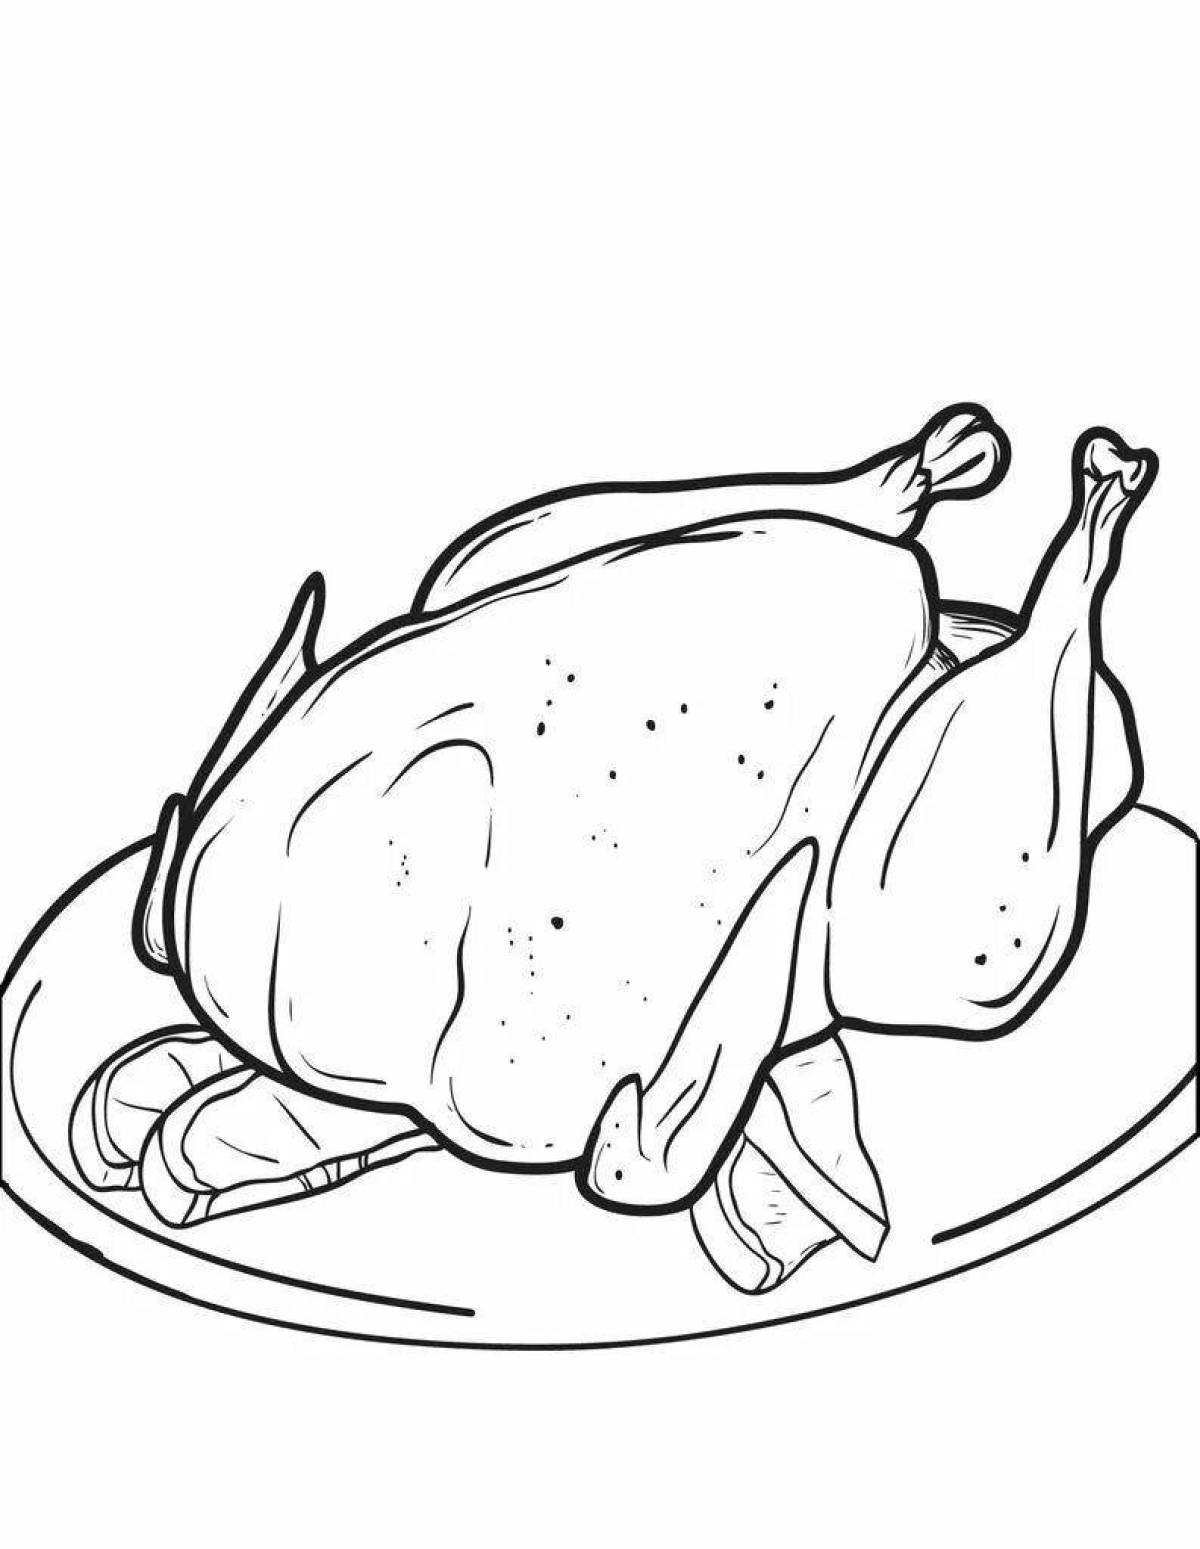 Comforting fried chicken coloring page